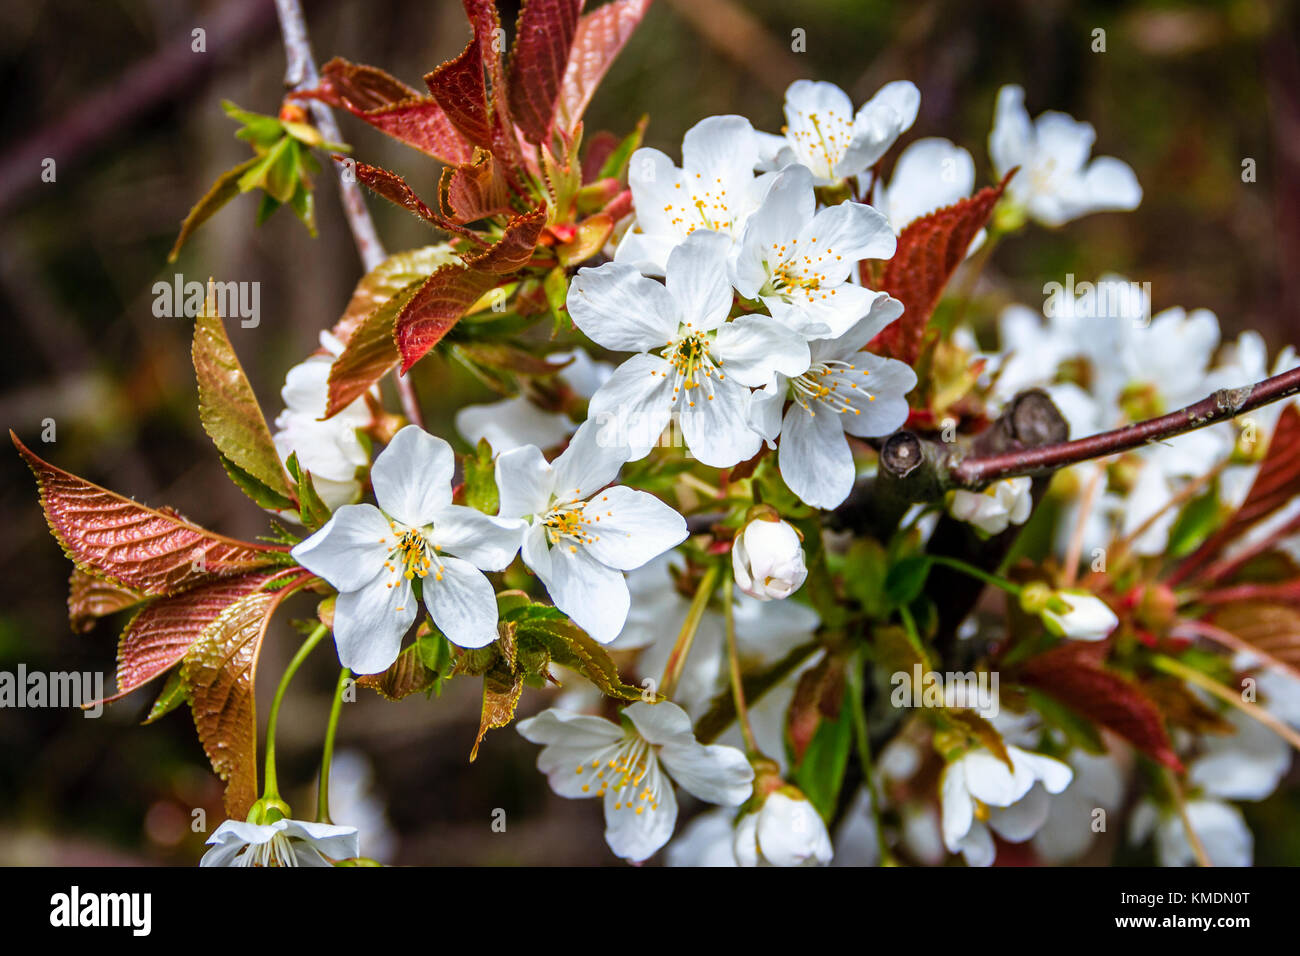 Close-up of white flowers on hawthorn trees. London, UK.  Plants are flowering a month earlier in the UK as the climate heats up, a study has found. Stock Photo